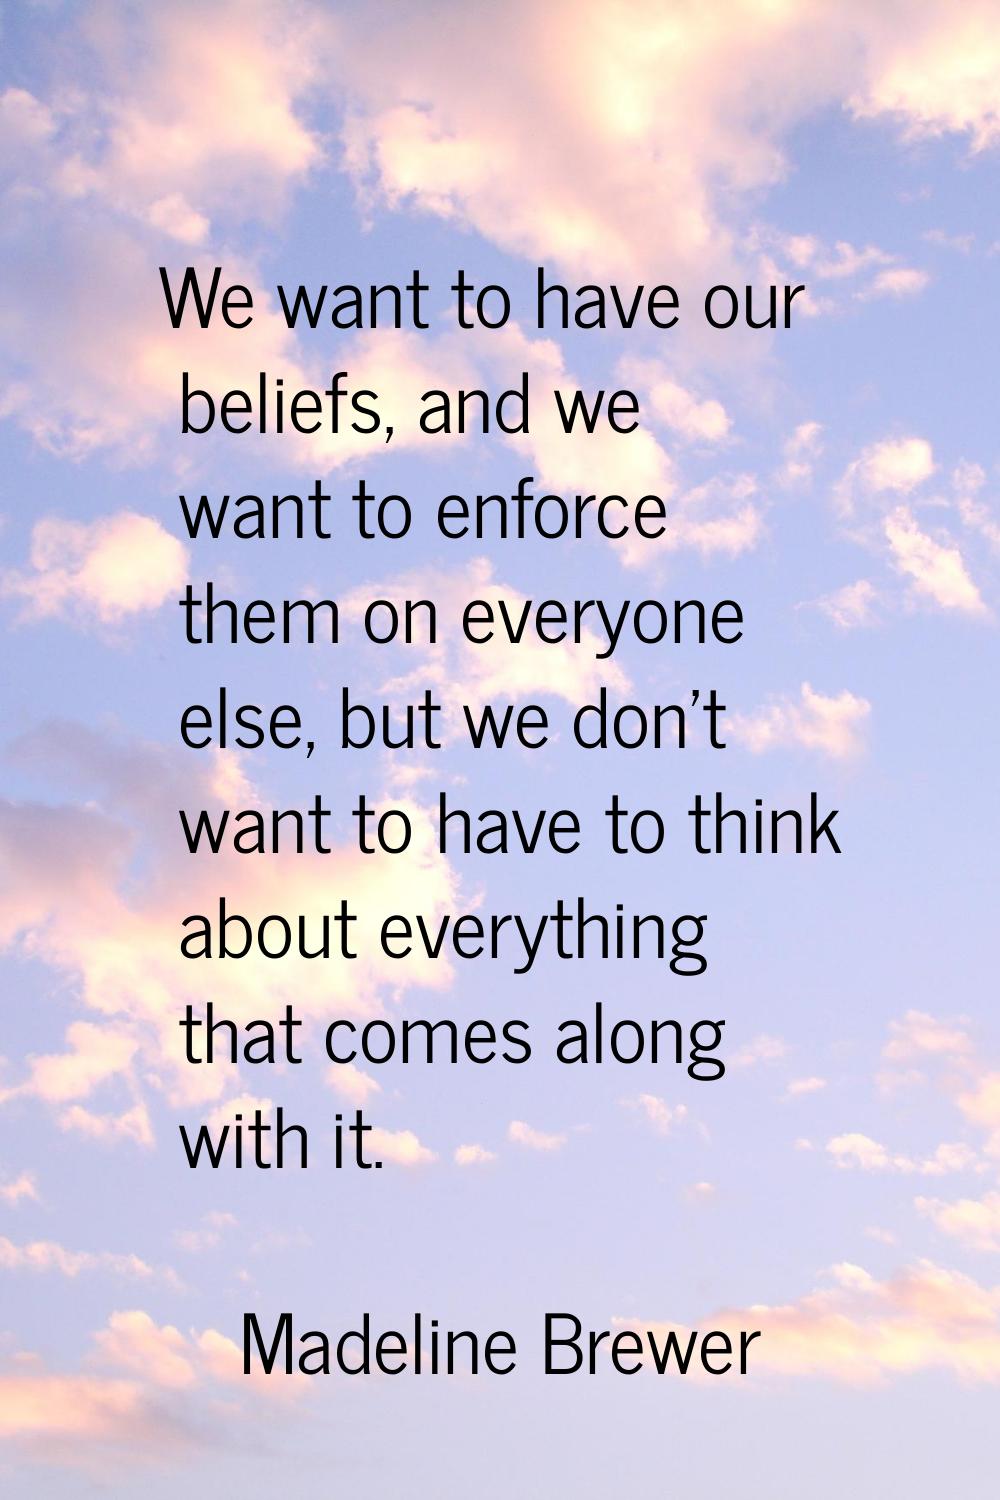 We want to have our beliefs, and we want to enforce them on everyone else, but we don't want to hav